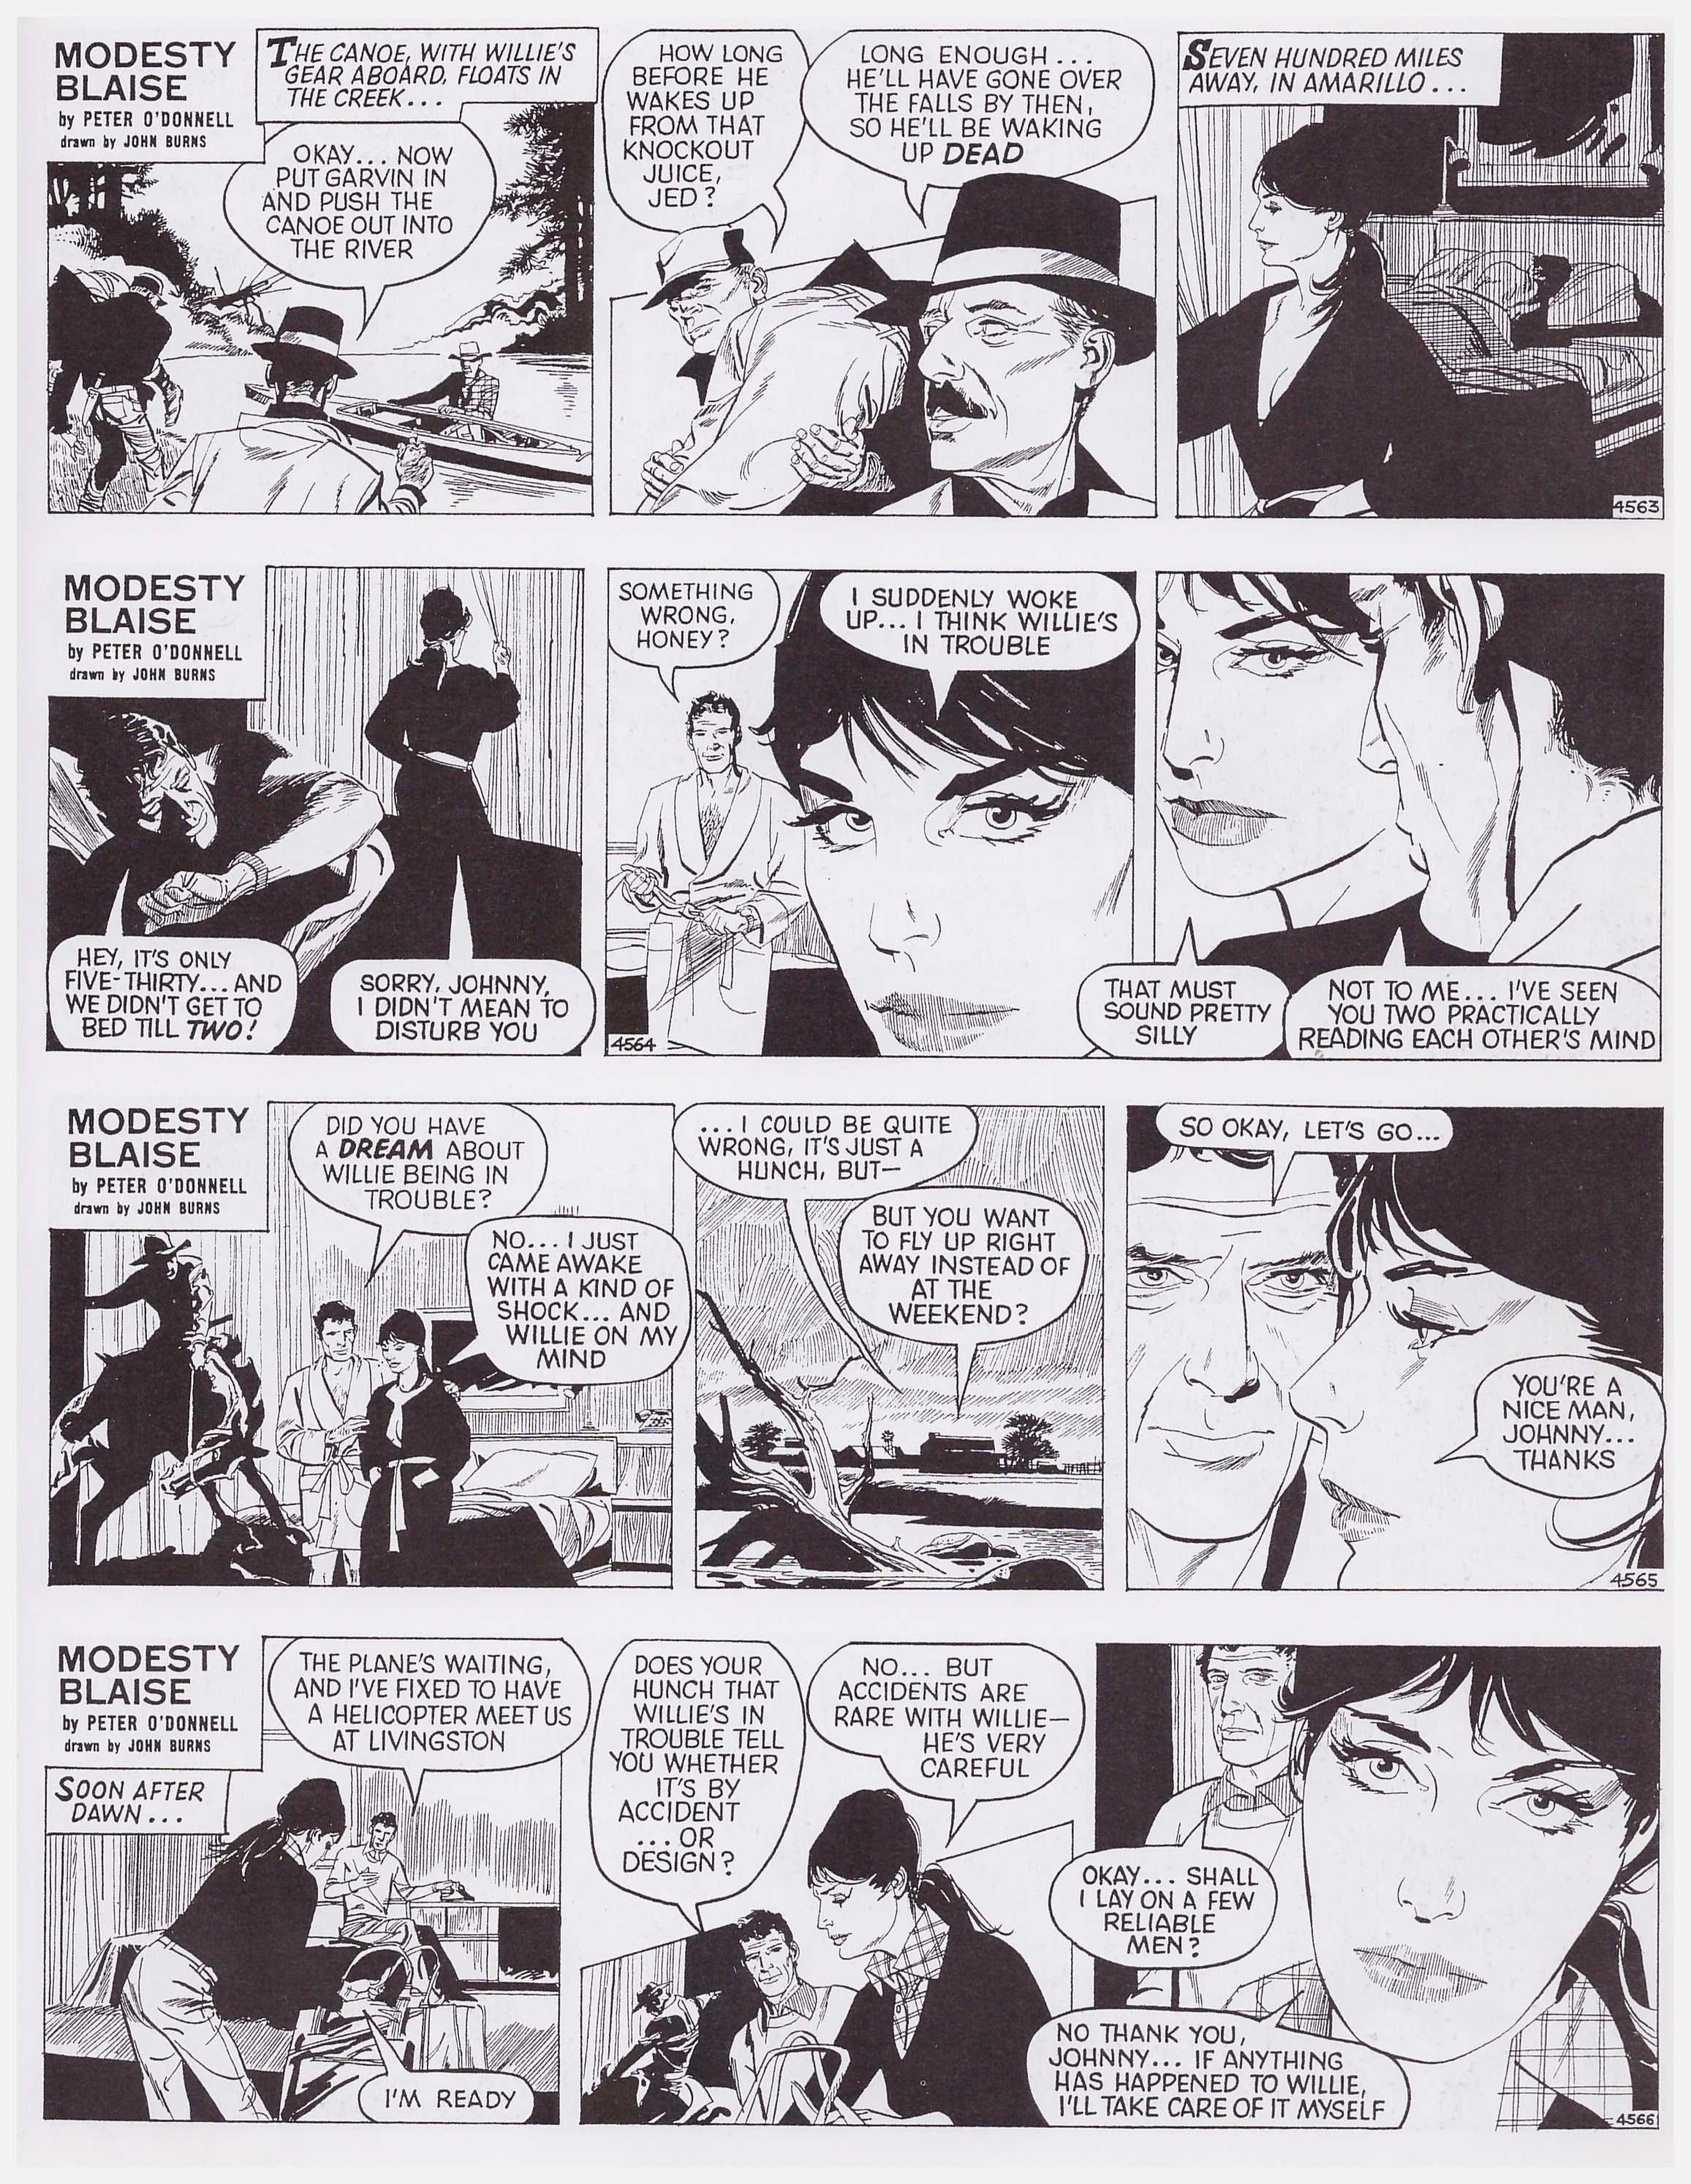 Modesty Blaise Yellowstone Booty review